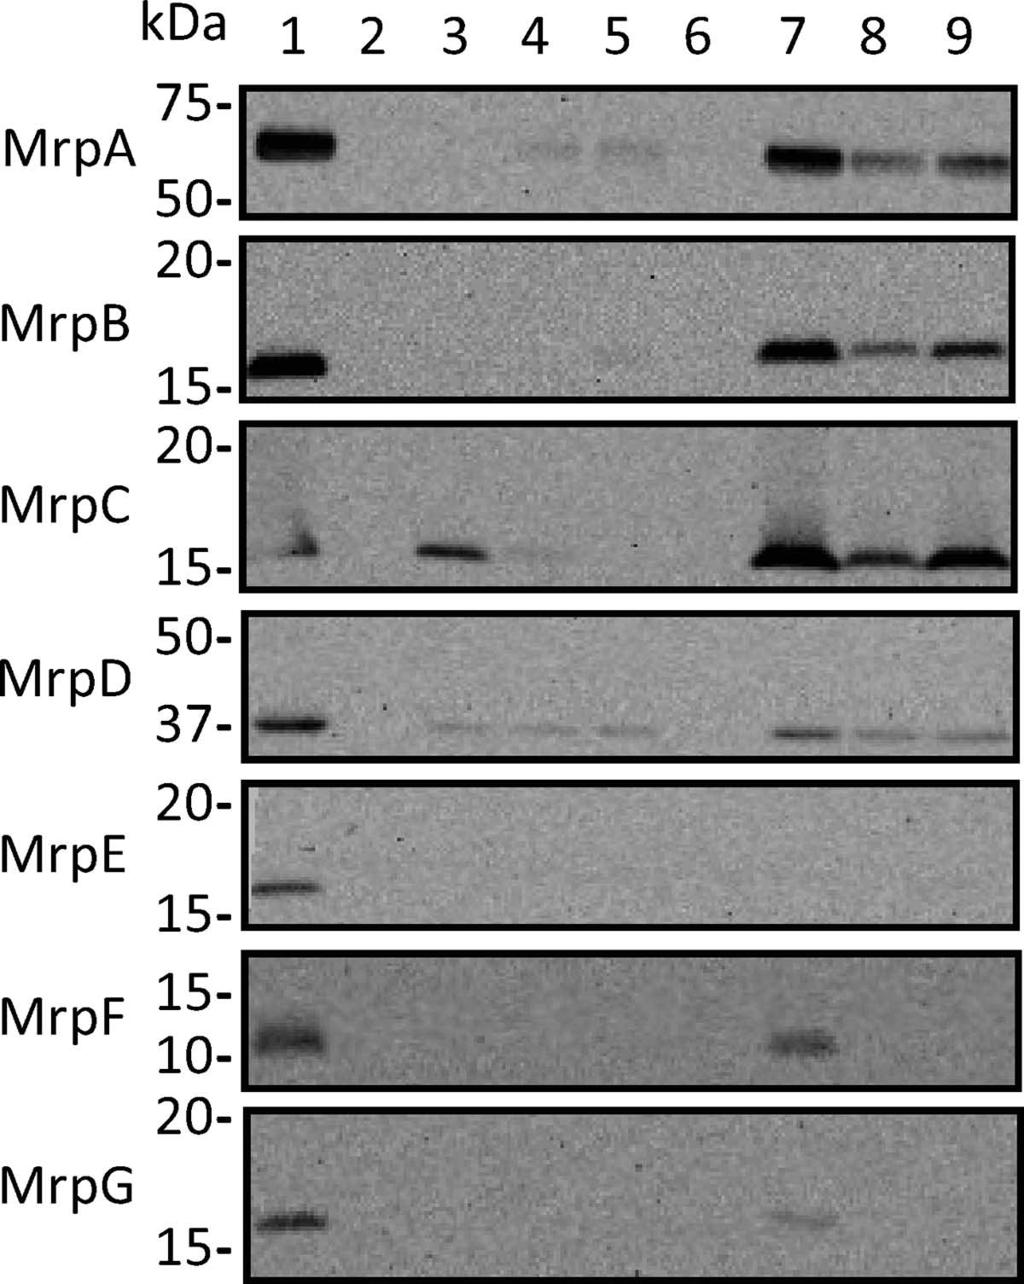 VOL. 190, 2008 HETERO-OLIGOMERIC Mrp COMPLEXES FROM B. PSEUDOFIRMUS OF4 4167 FIG. 2. Detection of the Mrp proteins in membranes from E.